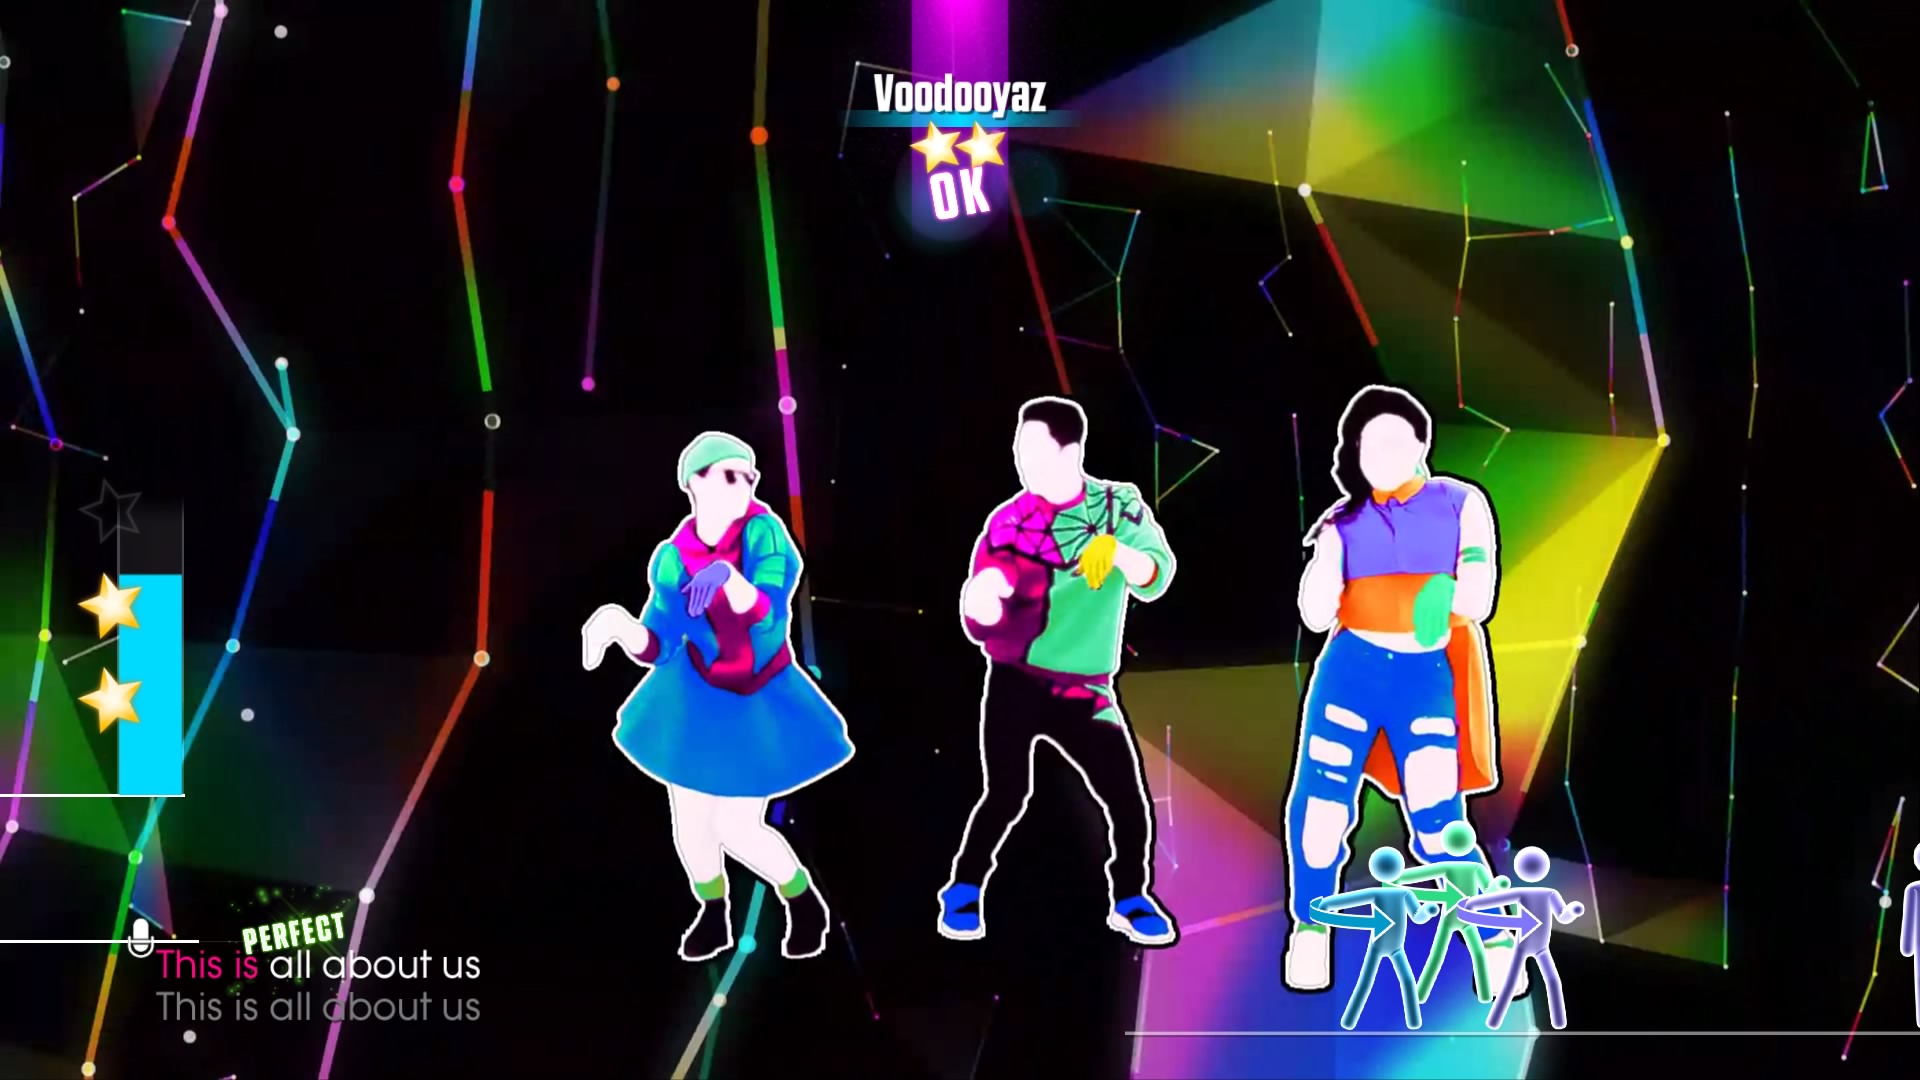 Pictures of Just Dance 2017 1/101920 x 1080